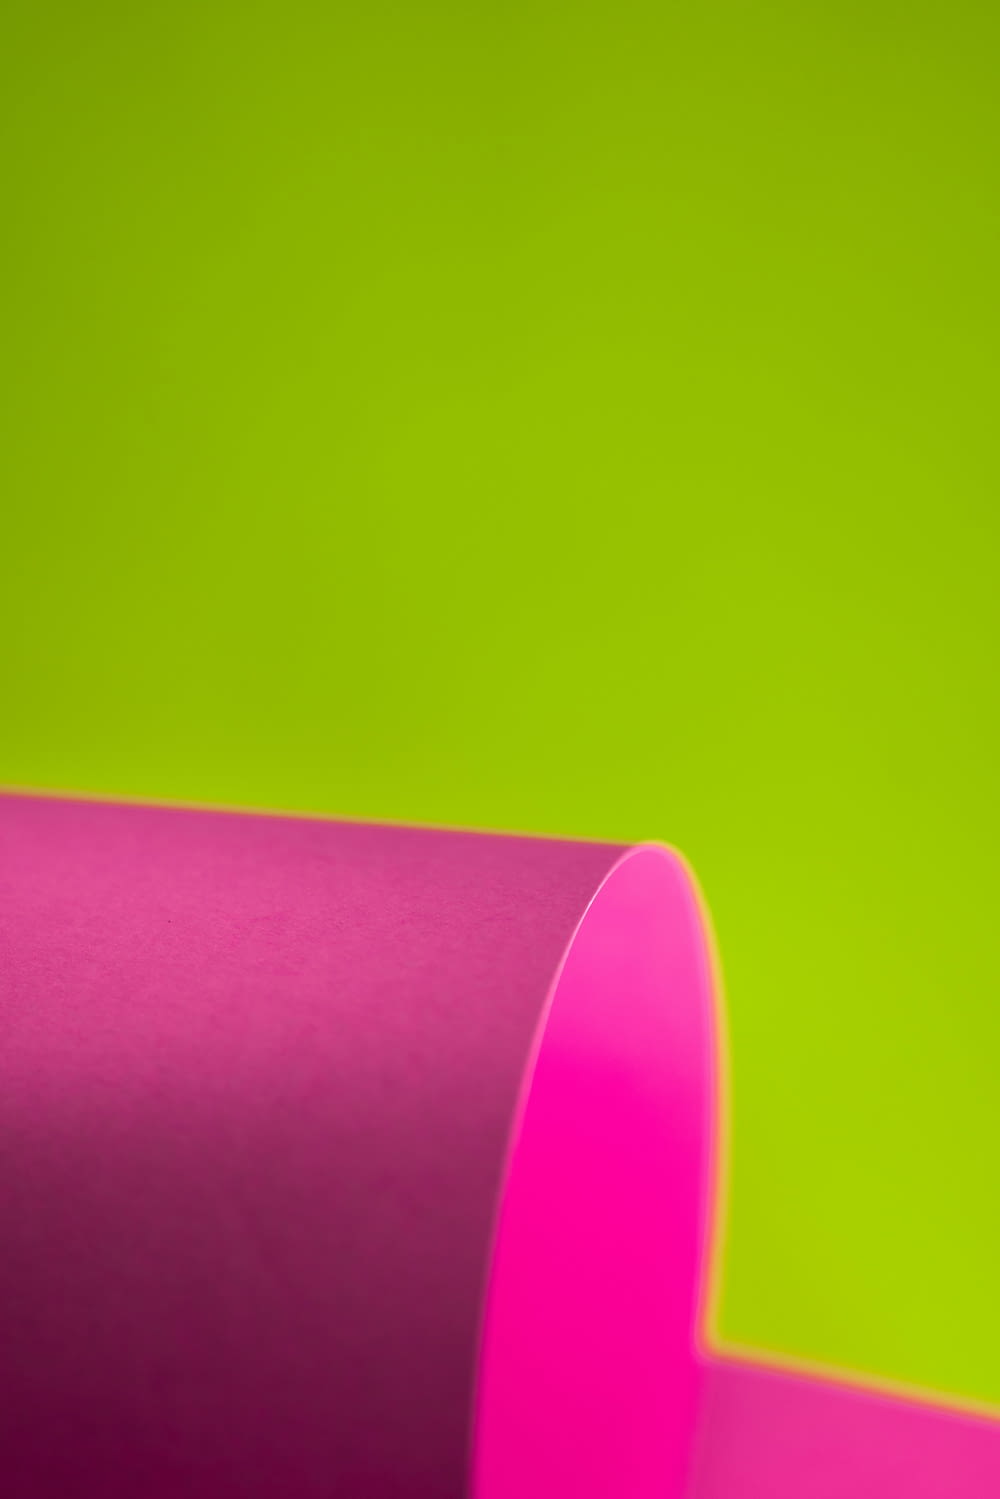 a close up of a pink tube on a green background